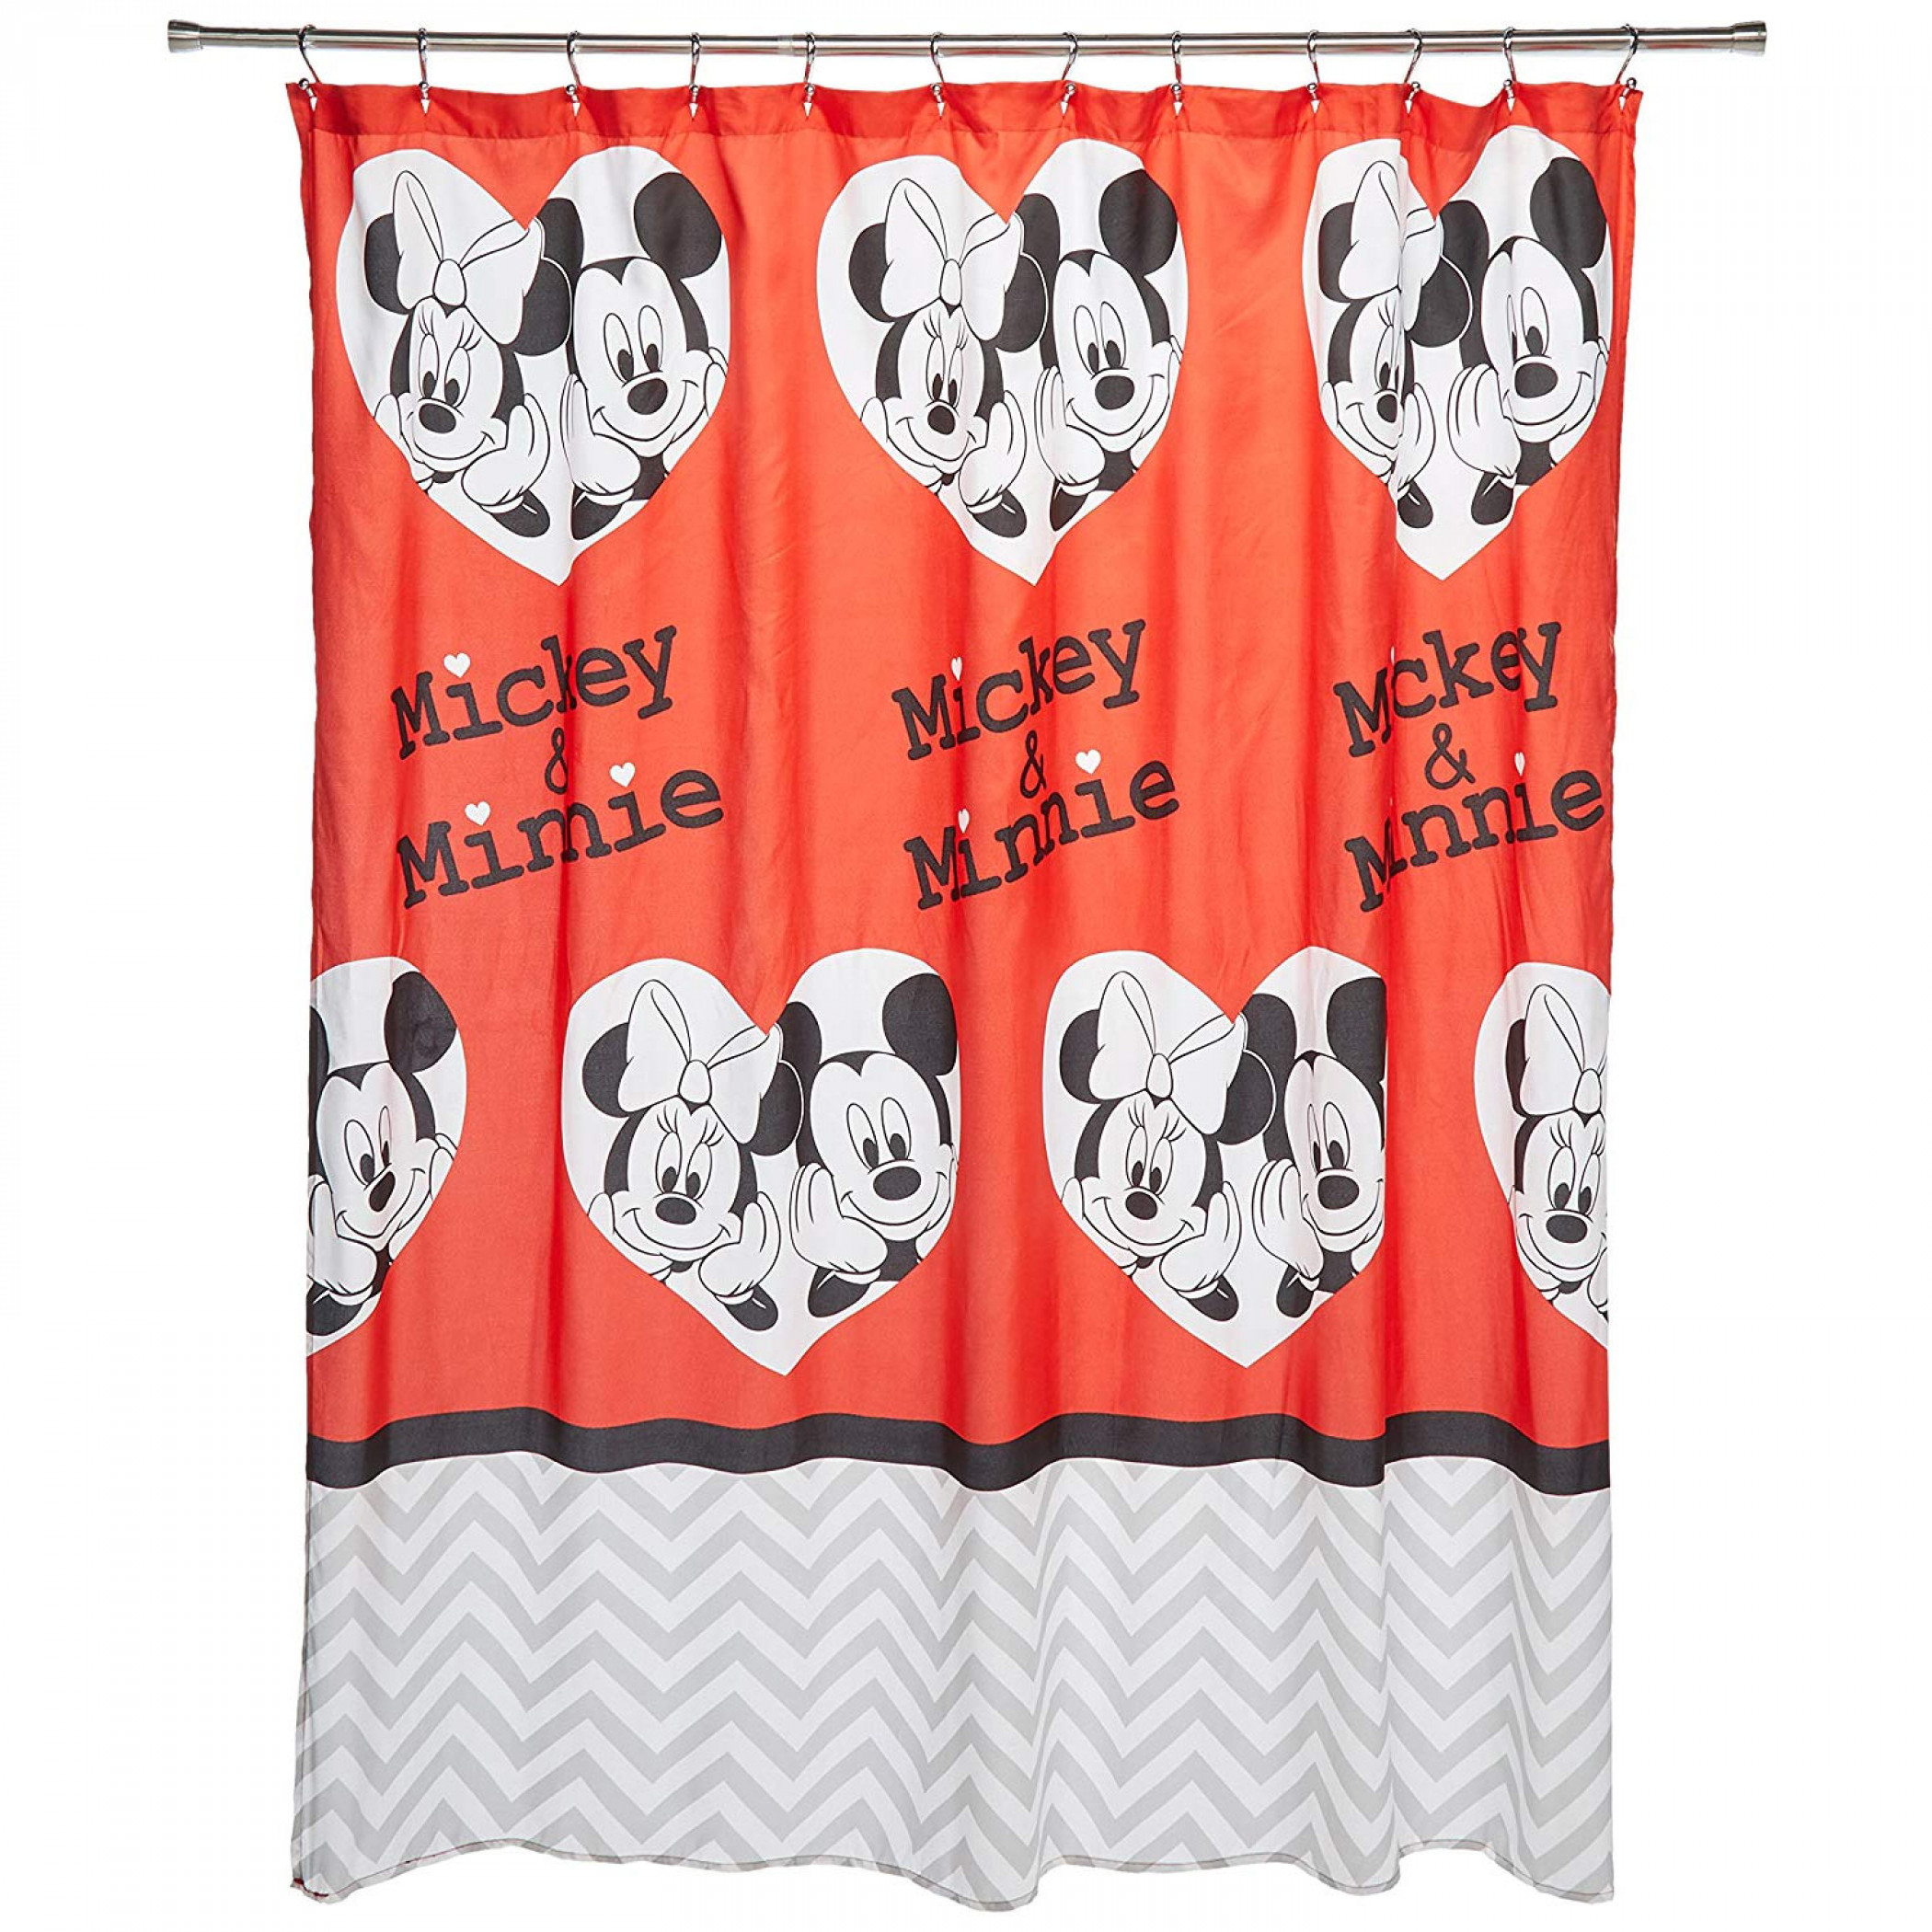 Disney Mickey and Minnie Mouse Love Shower Curtain